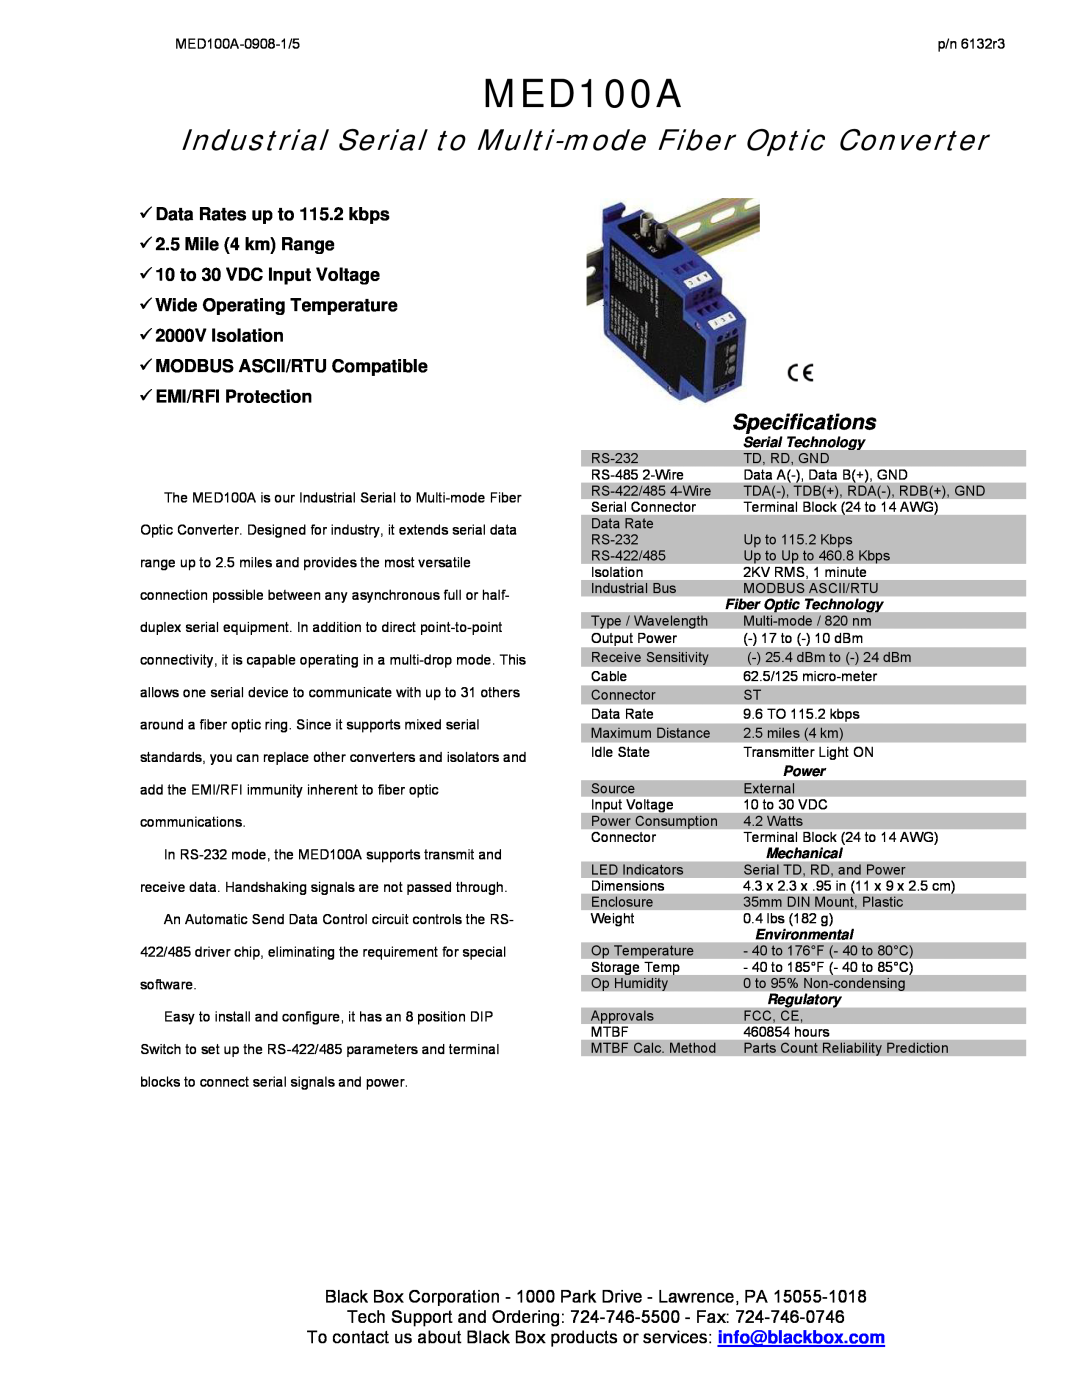 Black Box Industrial Serial to Multi-mode Fiber Optic Converter specifications MED100A, Specifications 